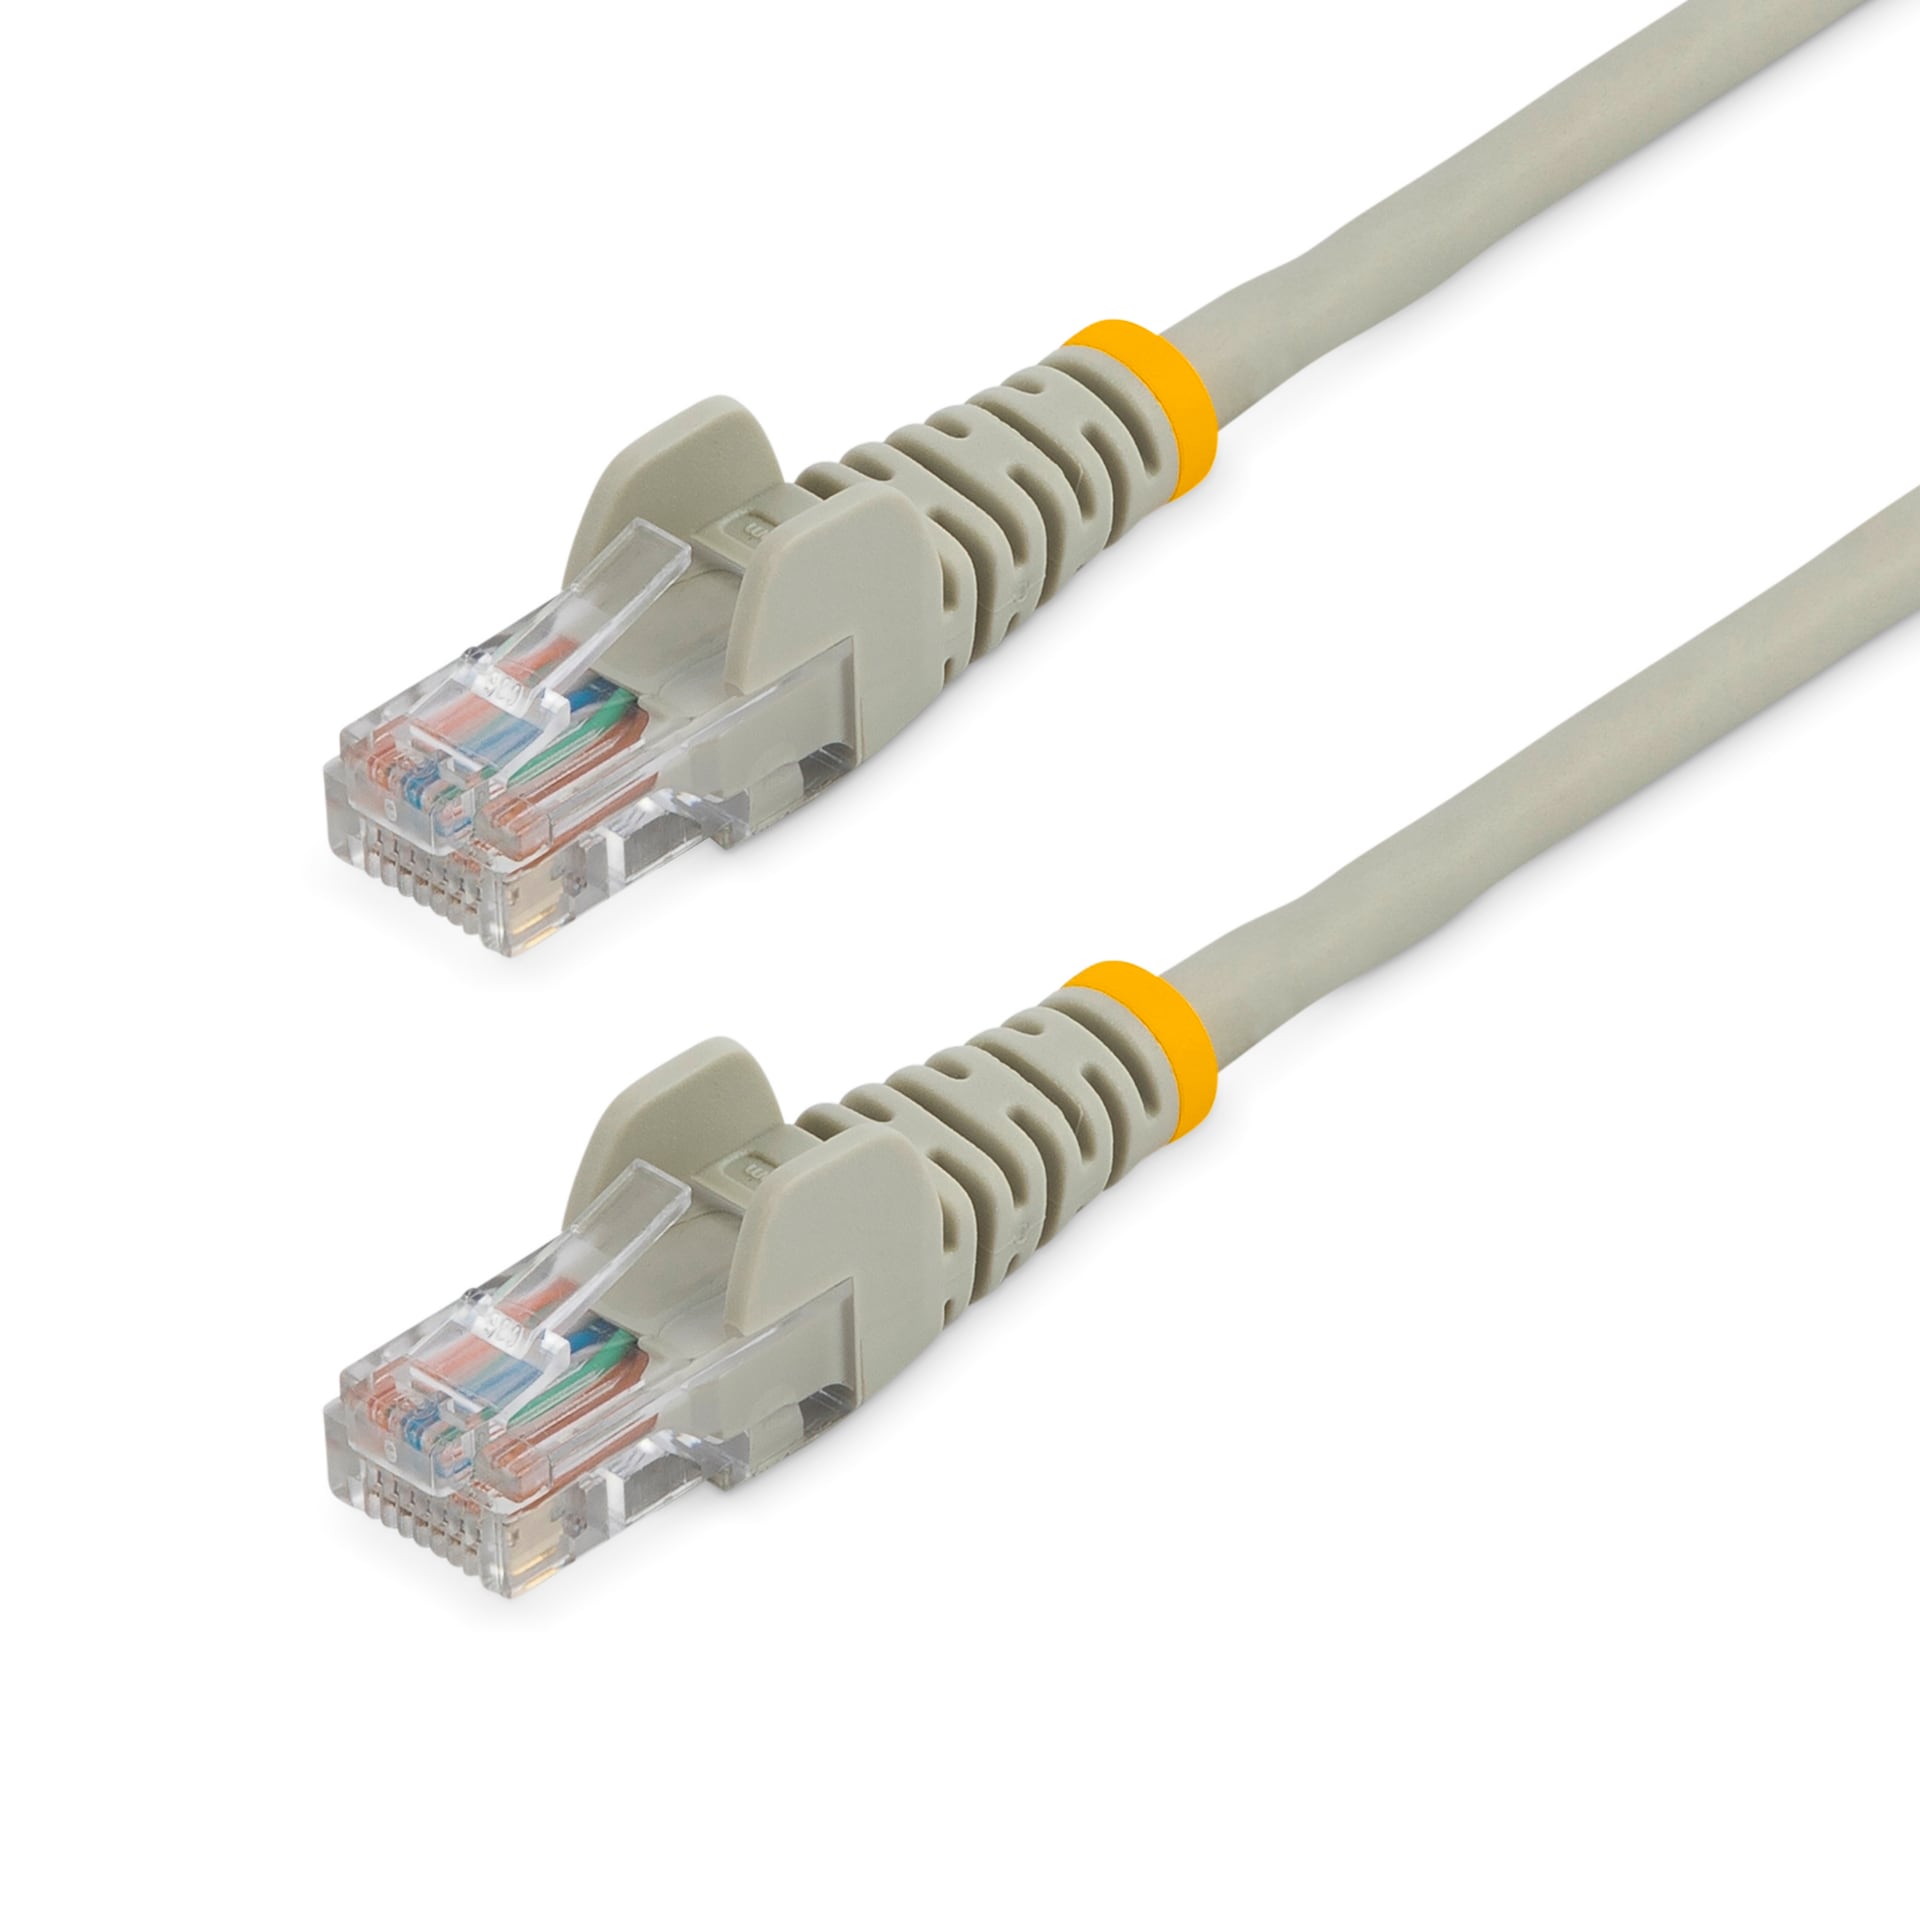 StarTech.com Cat5e Ethernet Cable 6 ft Gray - Cat 5e Snagless Patch Cable